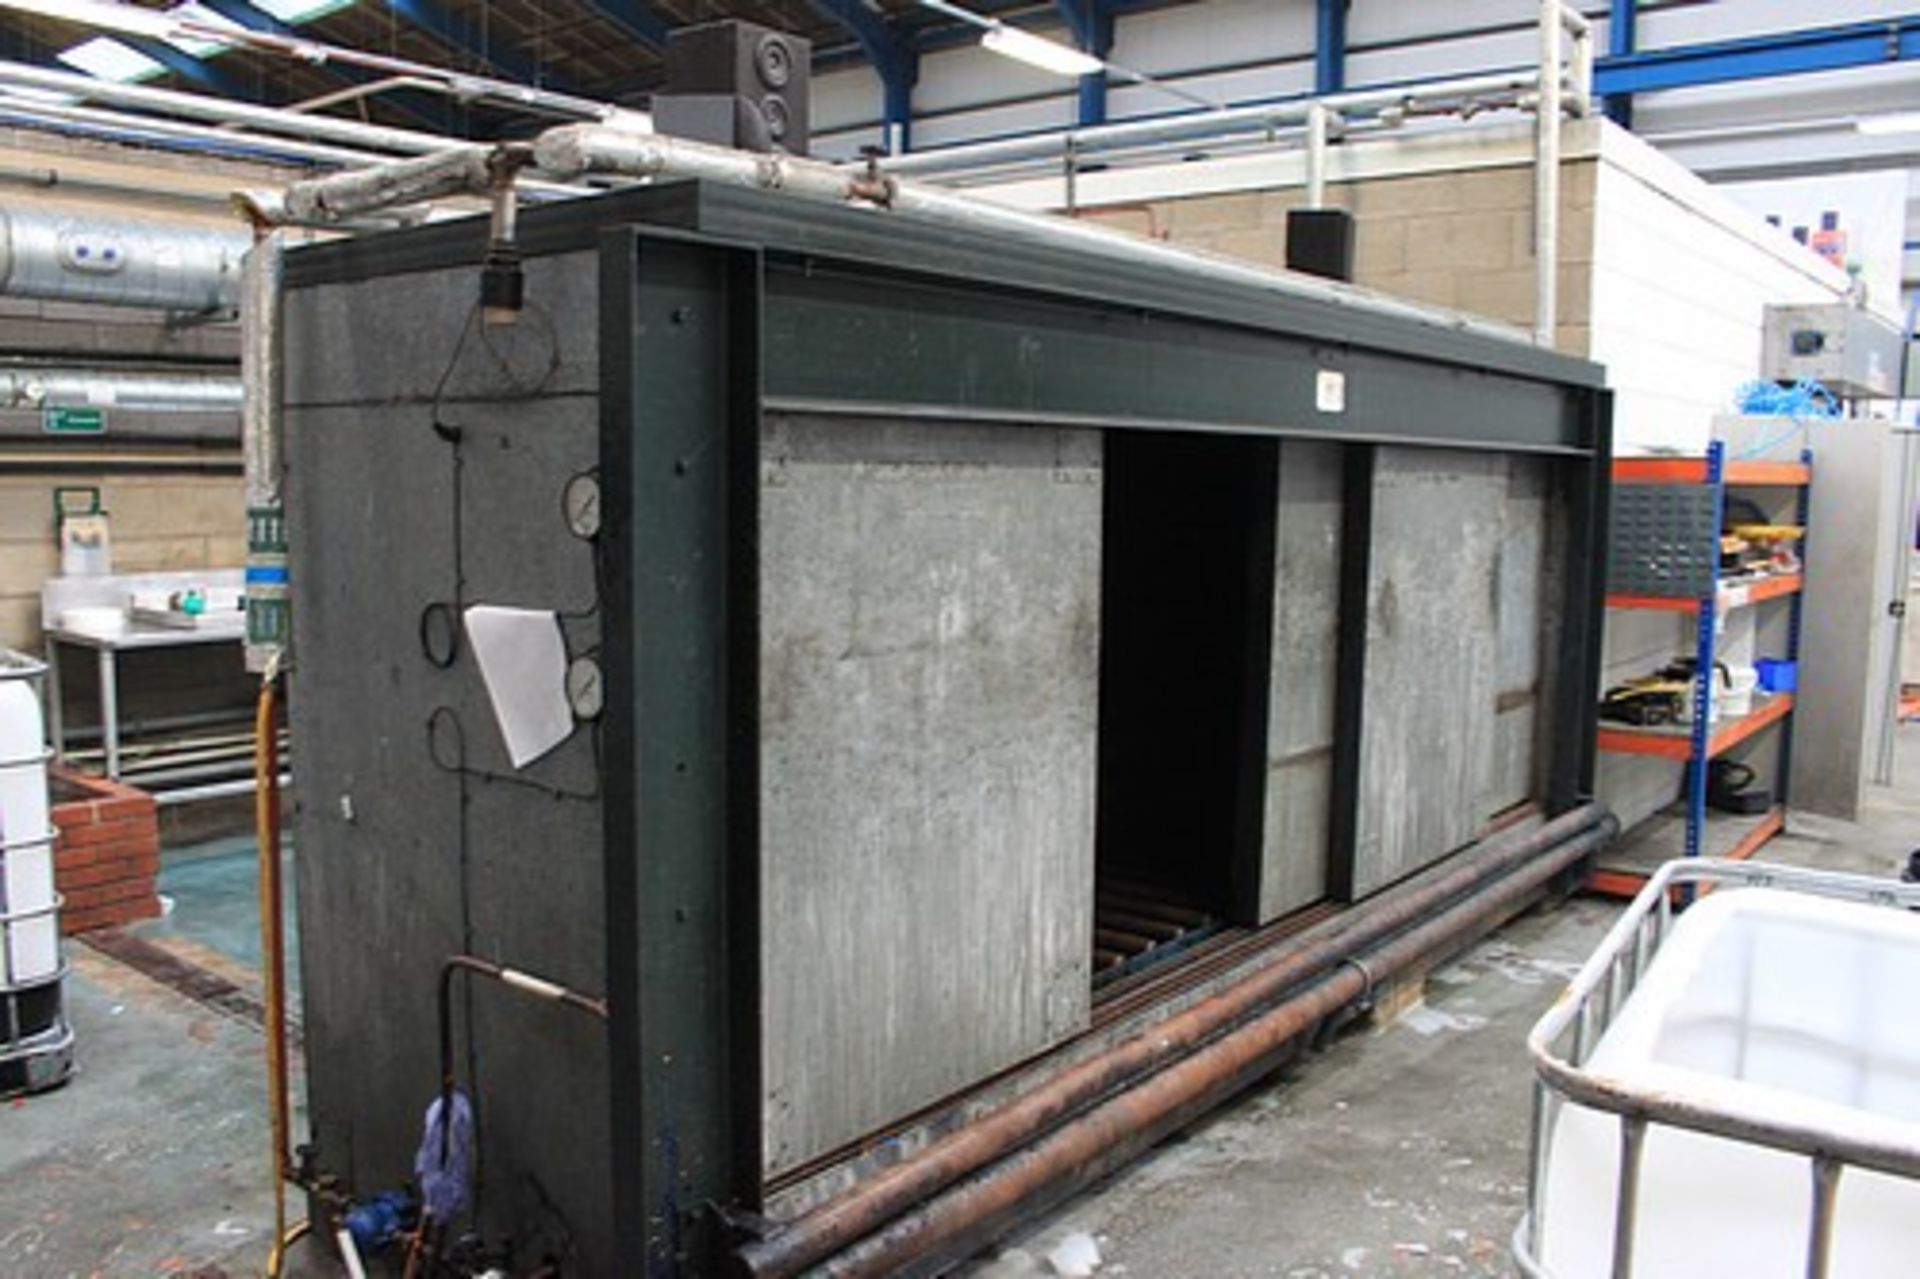 CED Projects drum oven steam cabinet 4500 x 1300 x 2000mm internally fitted with roller conveyor (